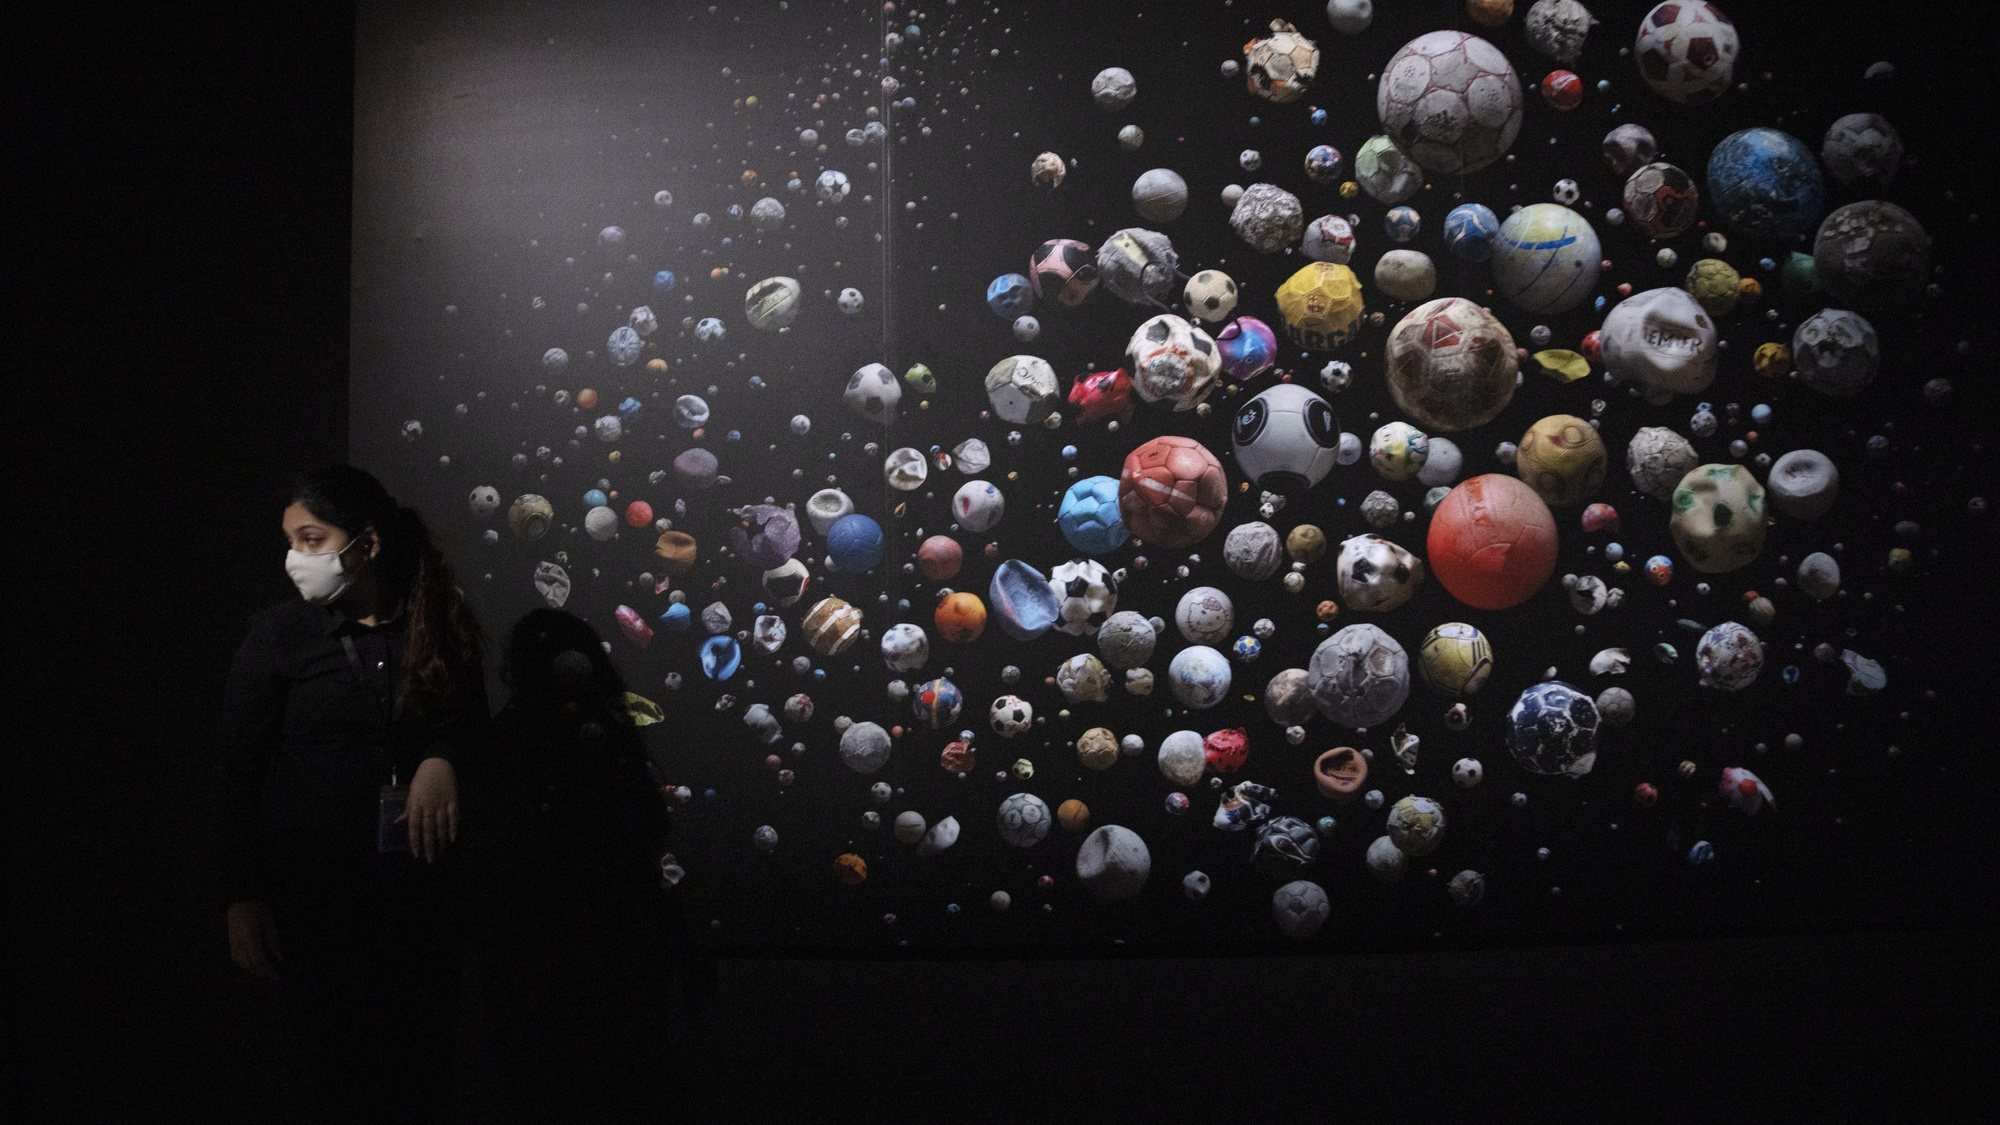 epa08672603 A staff member walks past British photographer Mandy Barker&#039;s work featuring 633 soccer balls collected on 104 beaches from 23 countries and islands in Europe by 62 people in four months, on display at the &#039;Planet or Plastic?&#039; exhibition at the ArtScience Museum in Singapore, 16 September 2020. The exhibition is a collaboration between National Geographic and the ArtScience Museum featuring visuals and artworks to raise awareness of society&#039;s dependence on plastics and the impact of its pollution on the world&#039;s oceans and marine animals.  EPA/HOW HWEE YOUNG